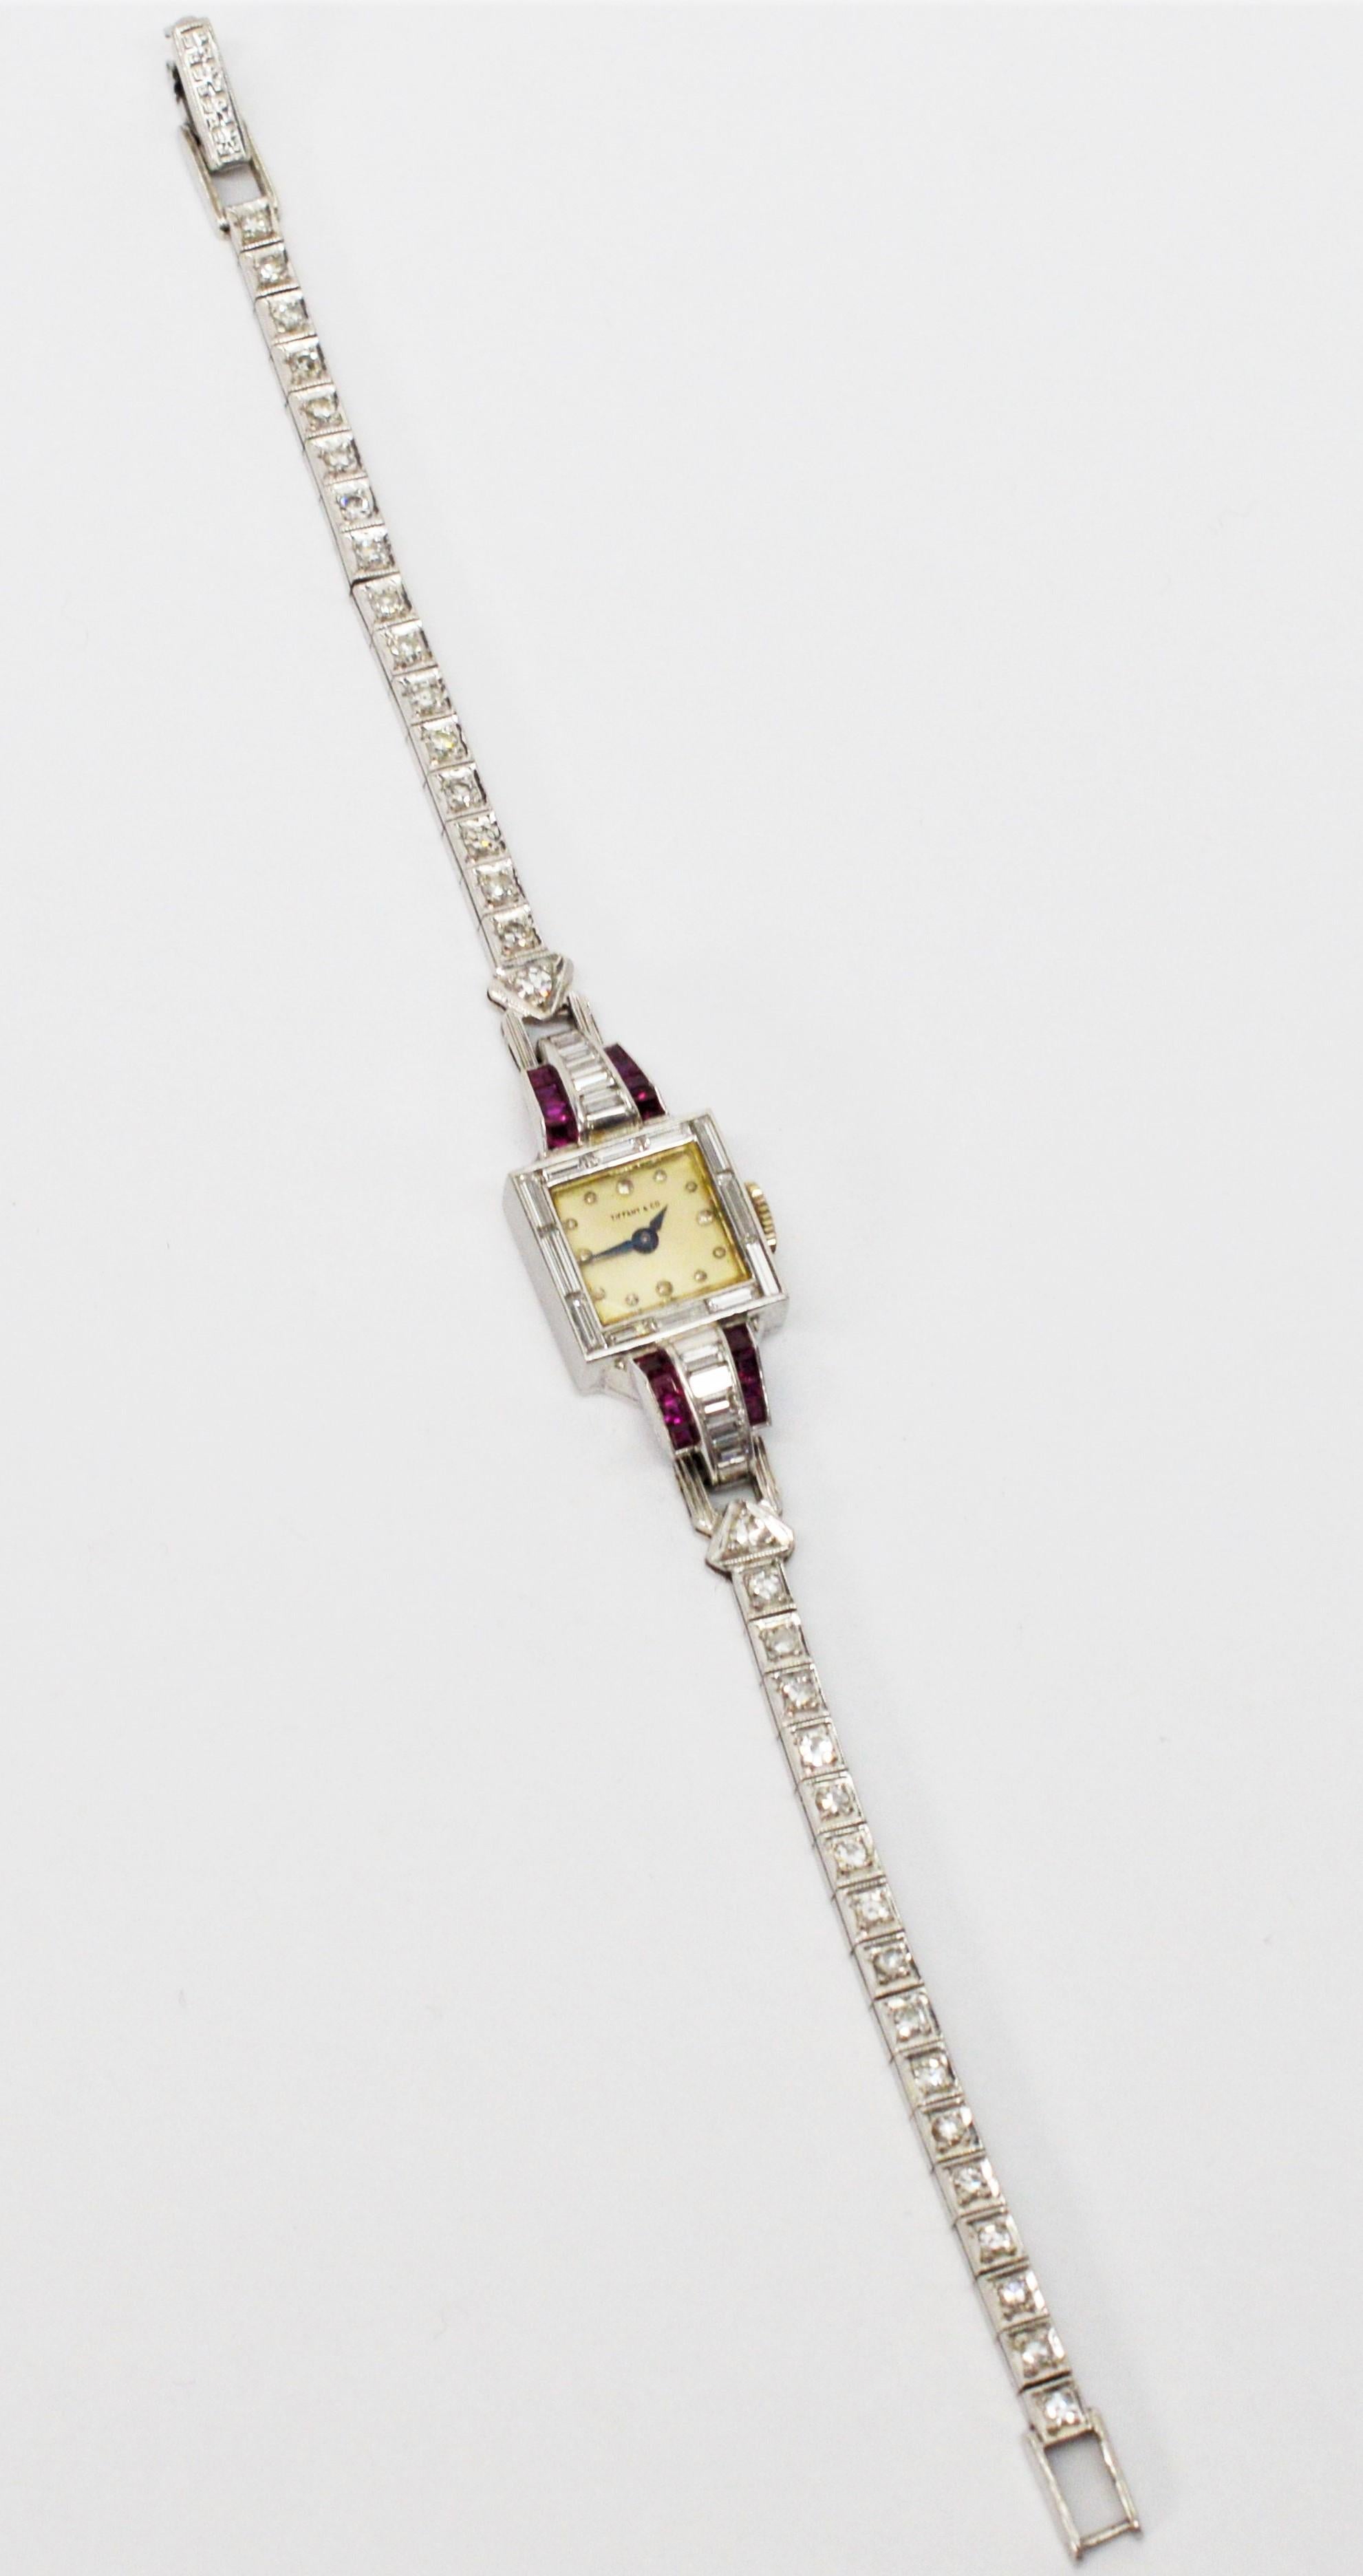 Diamonds set in platinum adorn the elegant bracelet of this Tiffany & Co. ladies Art Deco wrist watch.  Ultra feminine profile with it's slender geometric styling of the period, the 13.5 mm square watch head is flanked by diamond and ruby baguettes